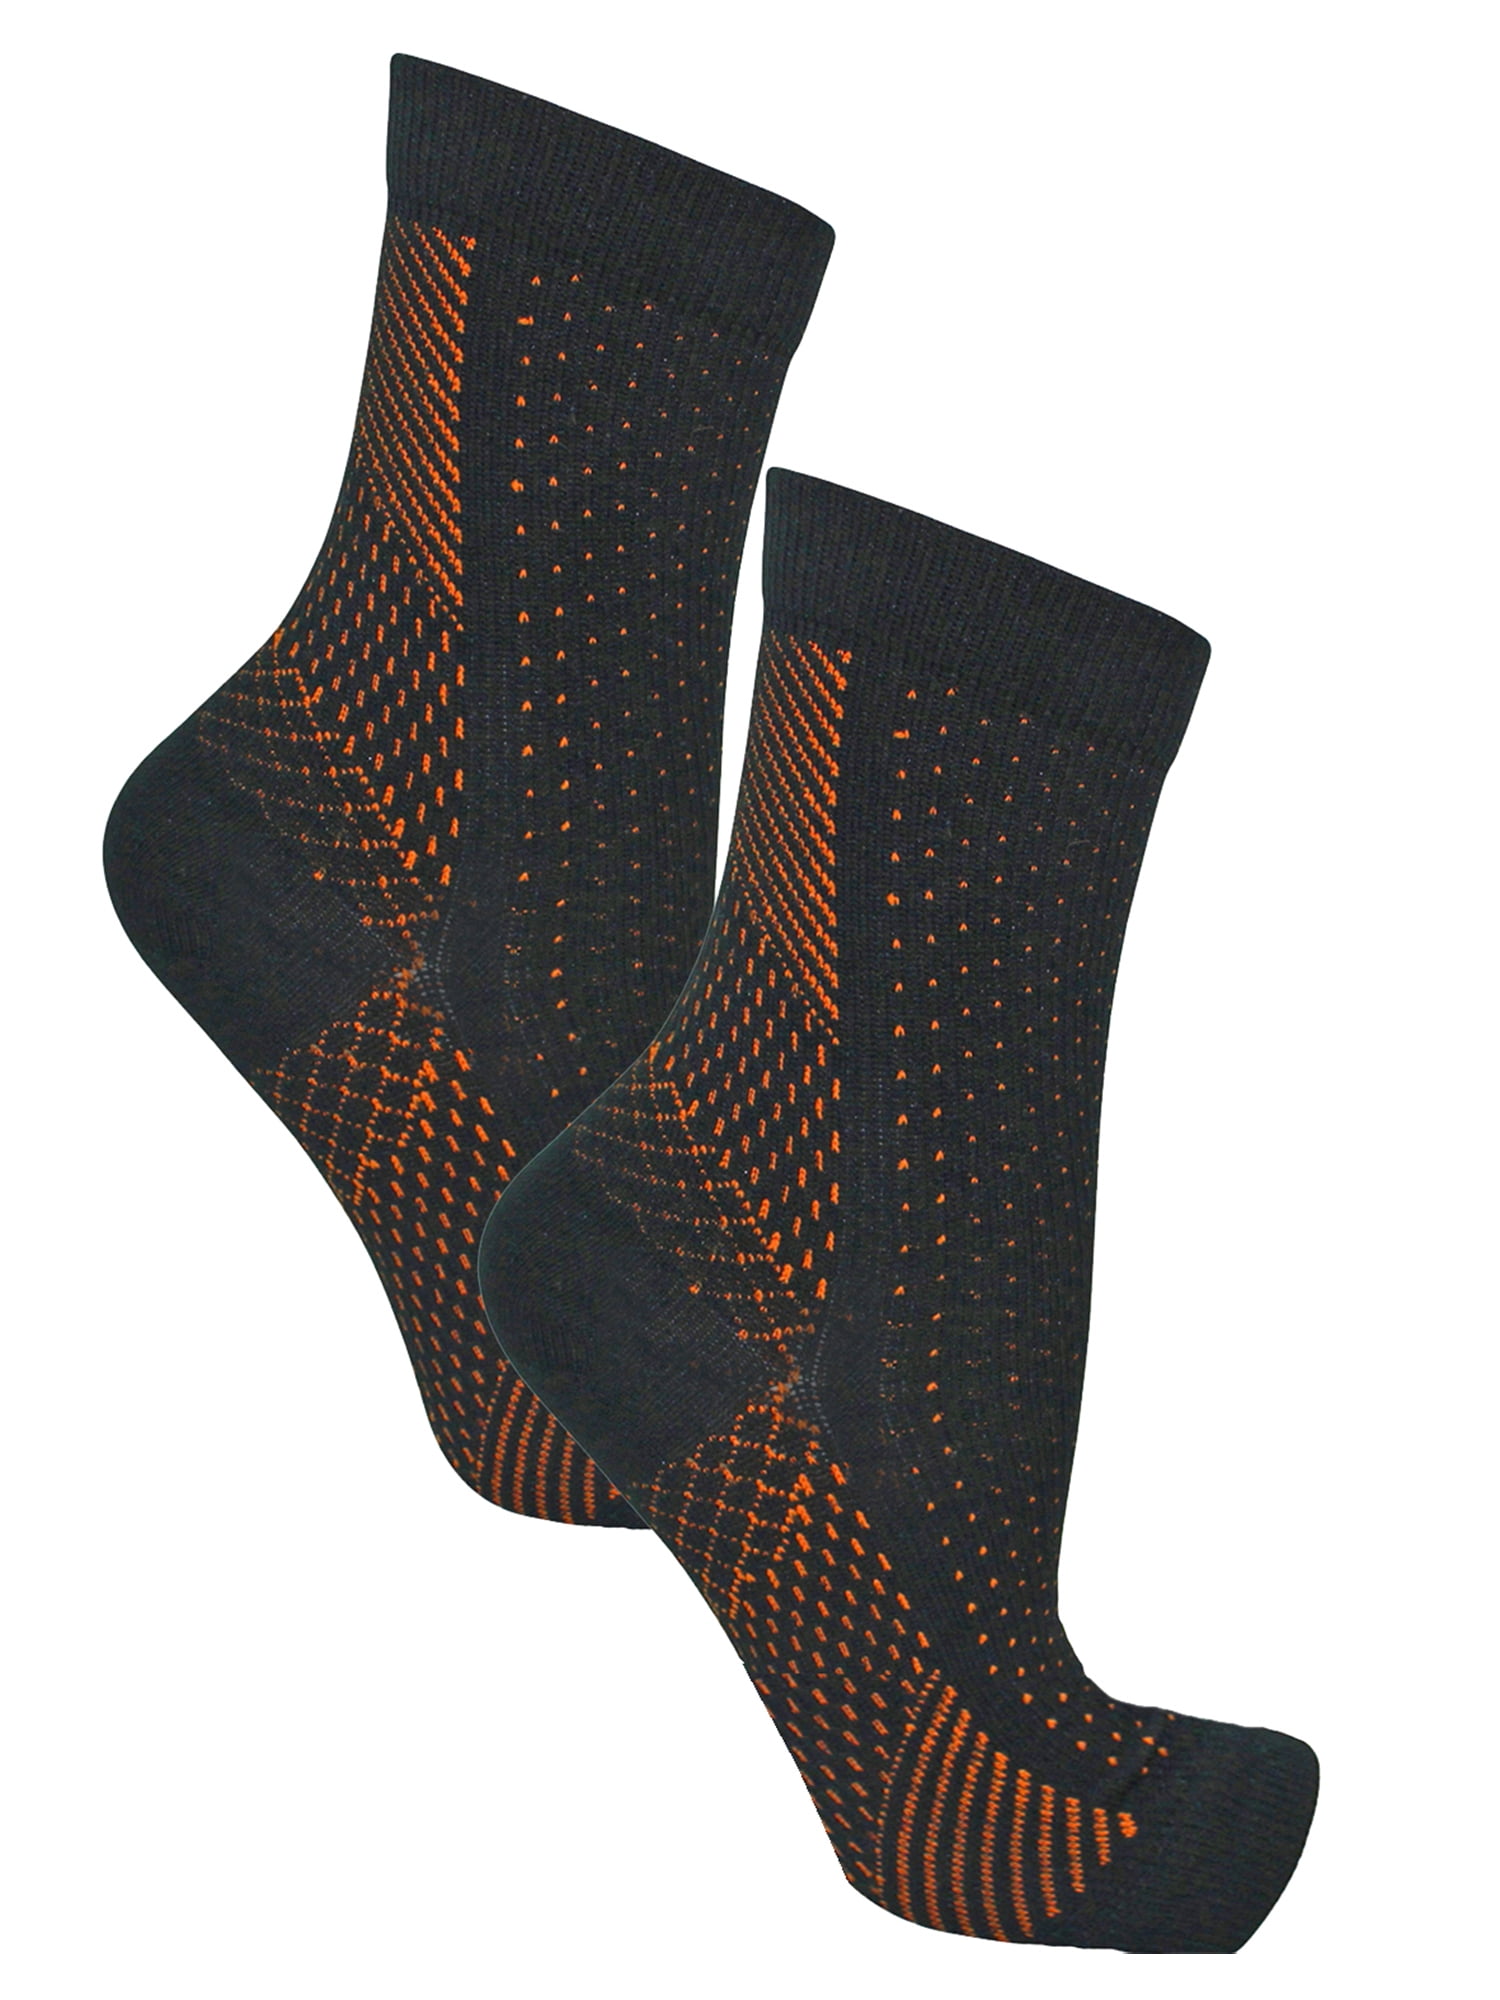 Copper Compression Recovery Foot Sleeve Support Socks - Walmart.com